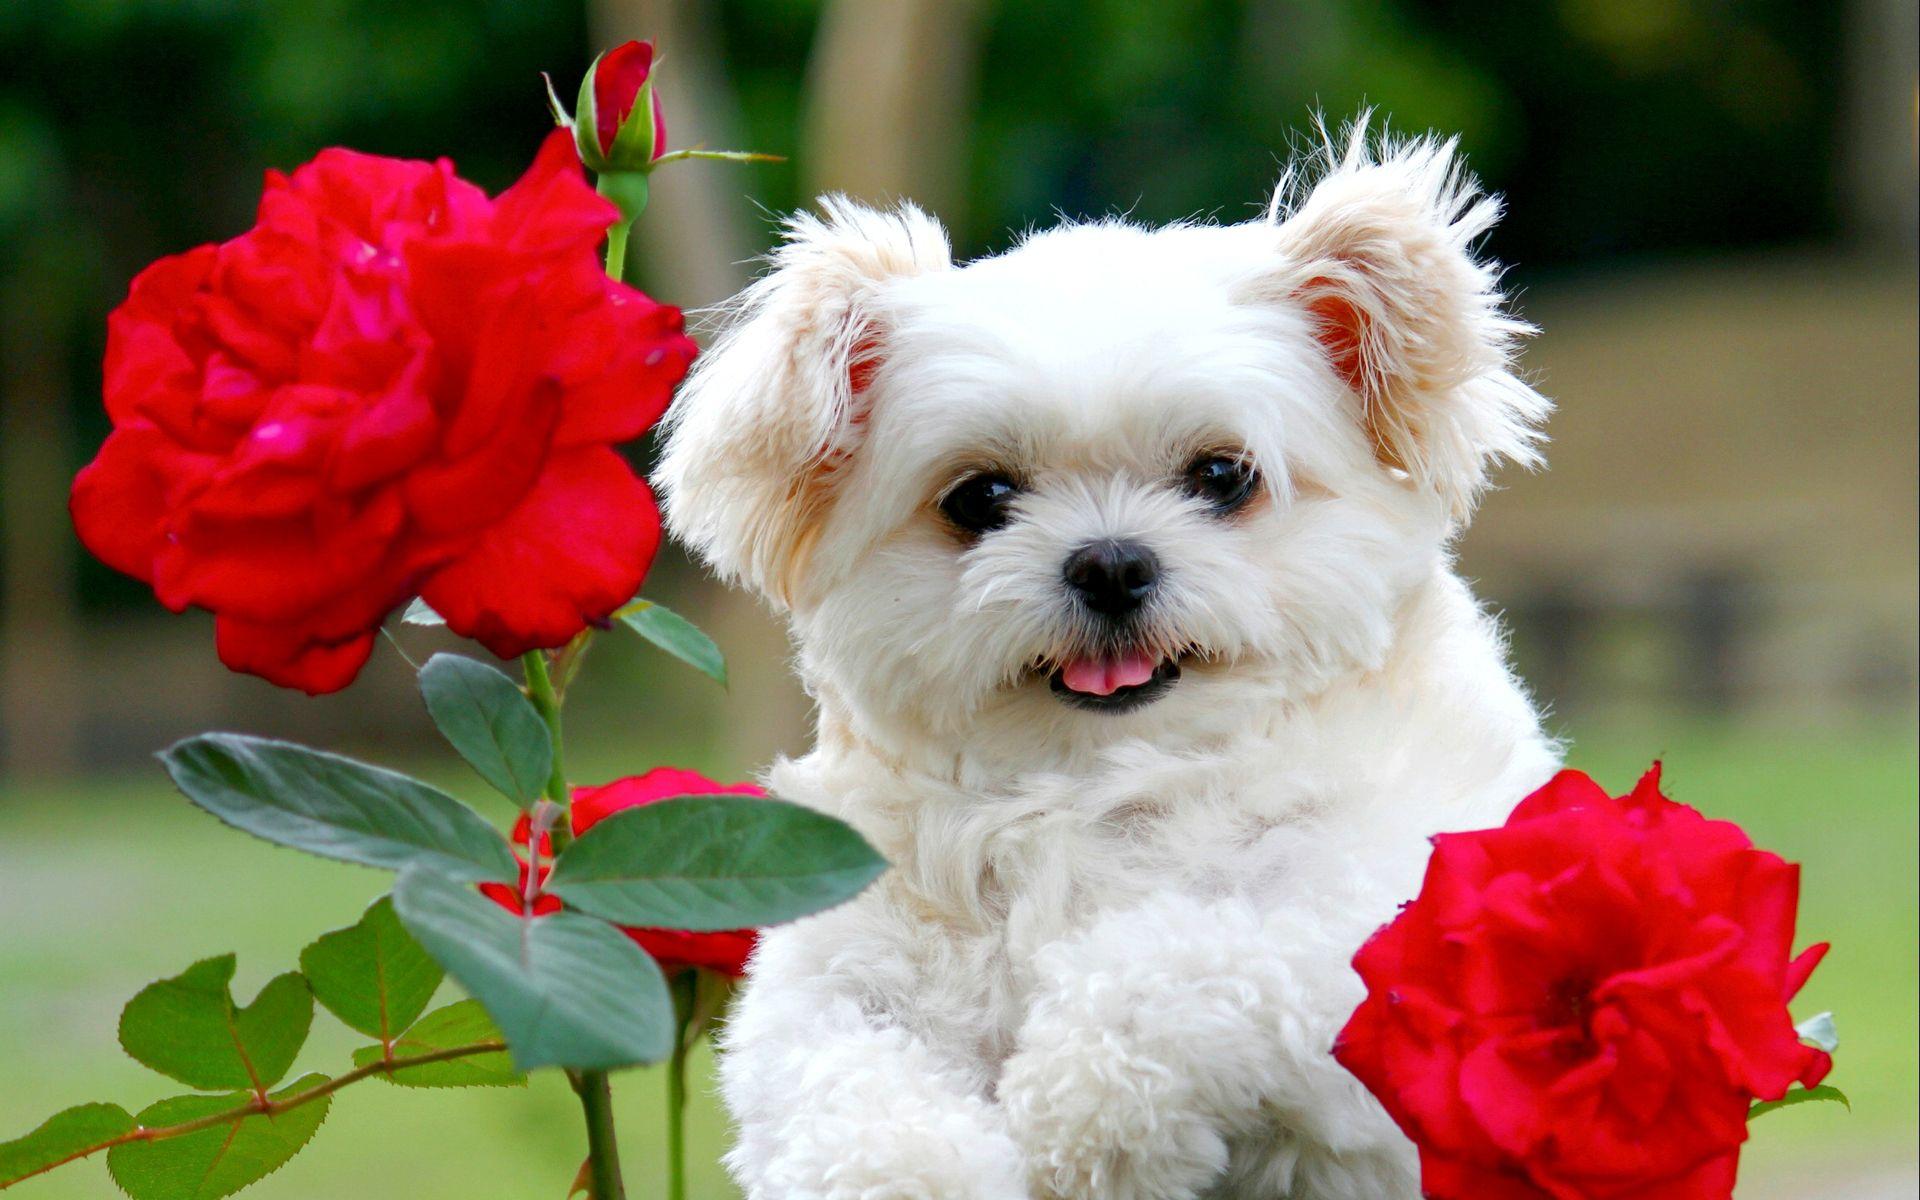 Adorable Puppy Wallpapers - Wallpaper Cave